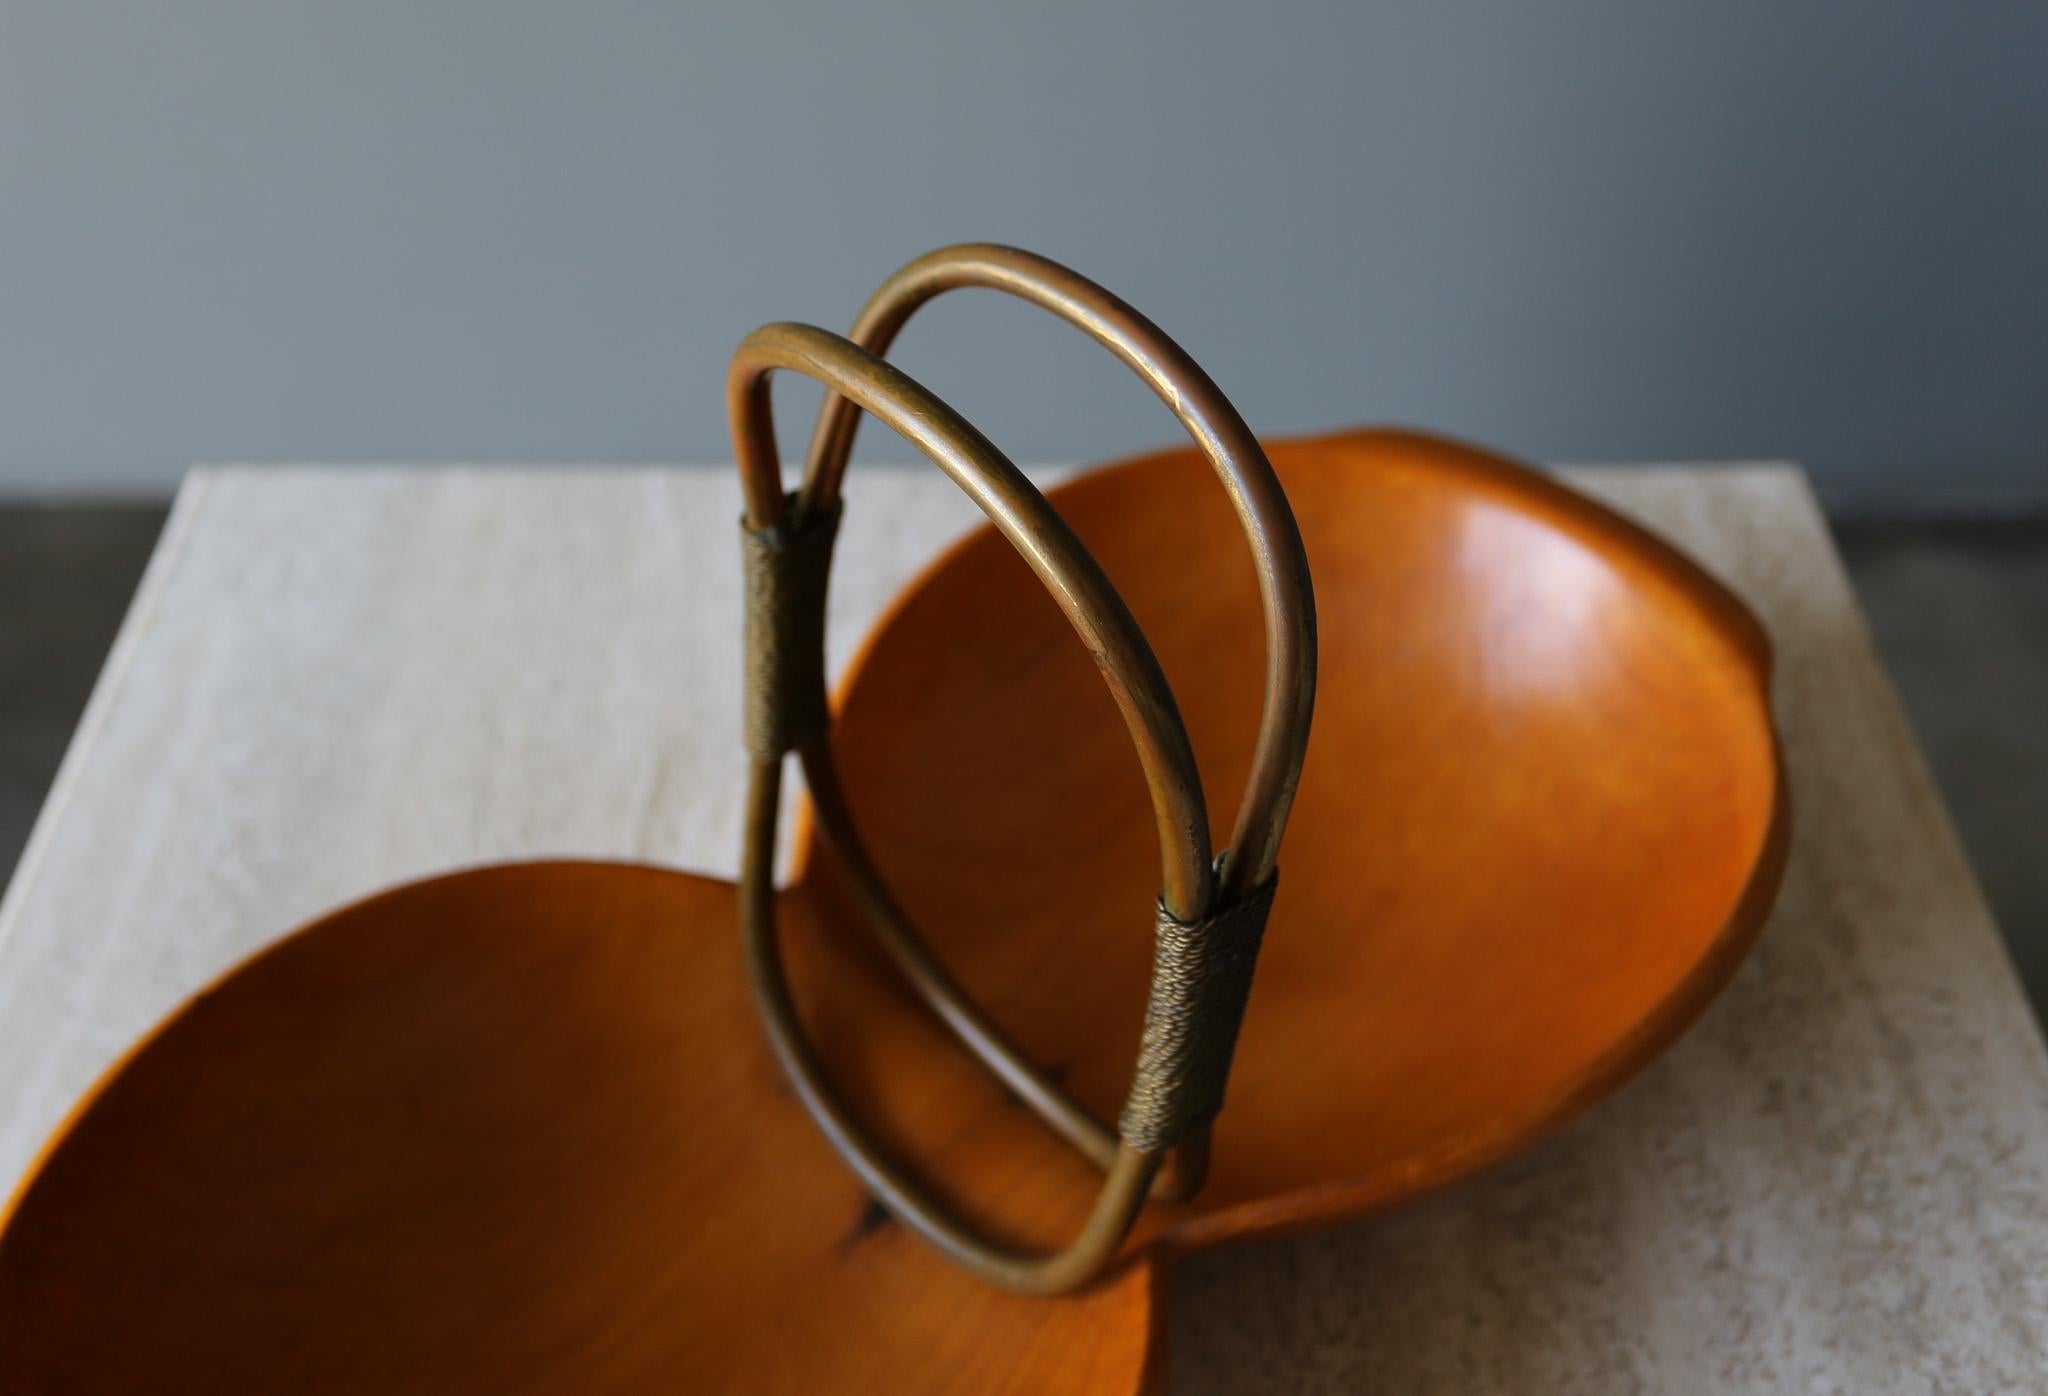 Aldo Tura Carved Walnut Wood & Brass Bowl for Macabo, Italy, c.1970 For Sale 3